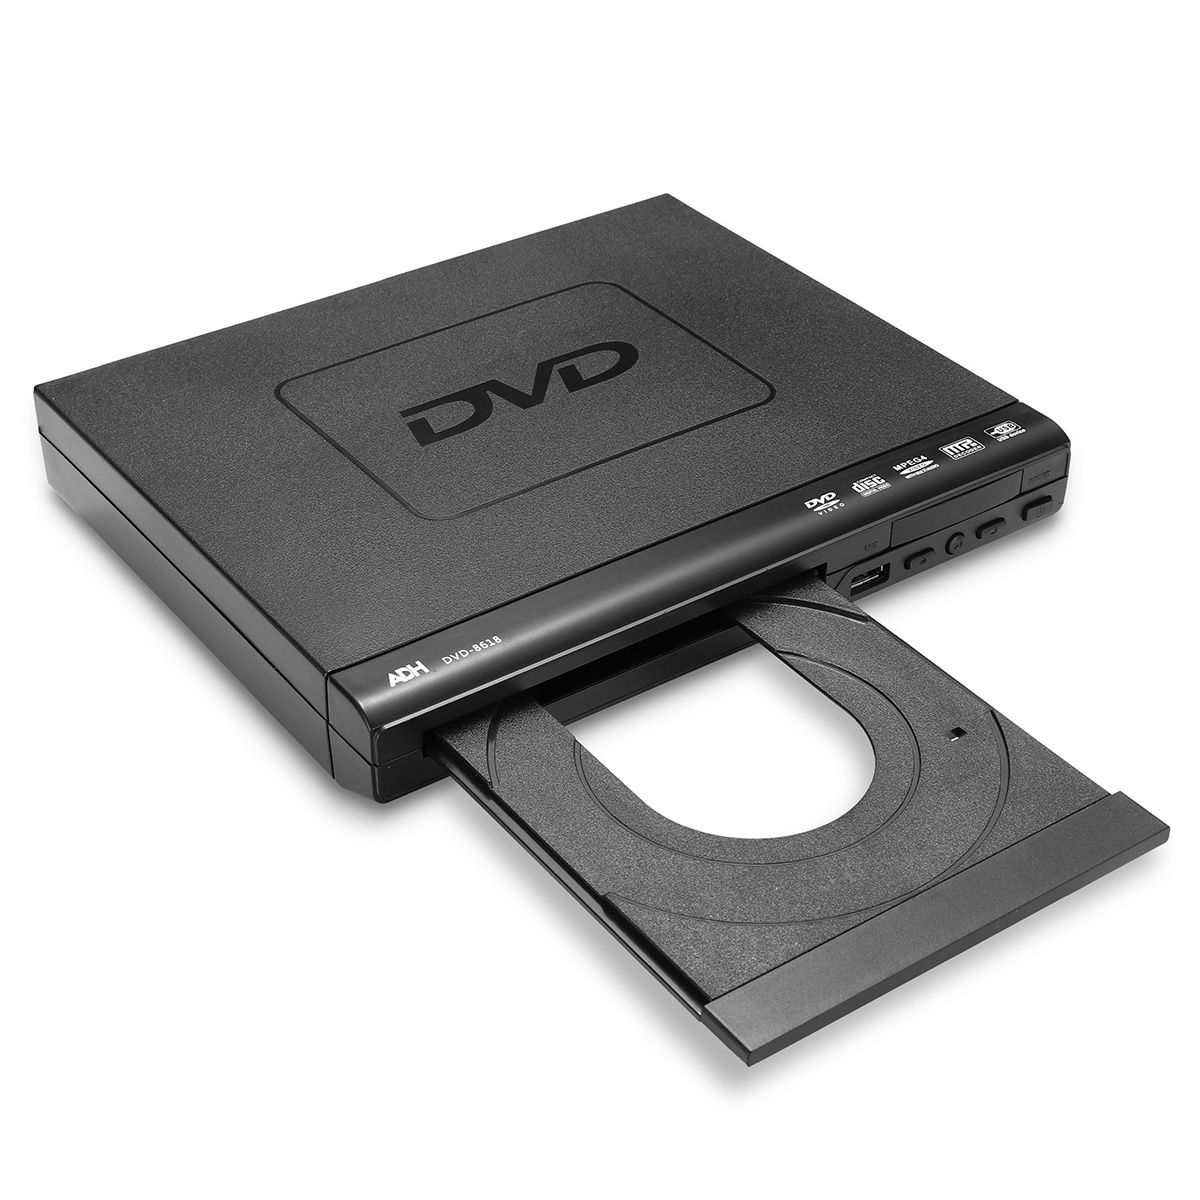 1080P-DVD-Player-Remote-Controller-Multi-angle-Viewing-USB-SD-Card-Reader-CD-DVD-RW-1347690